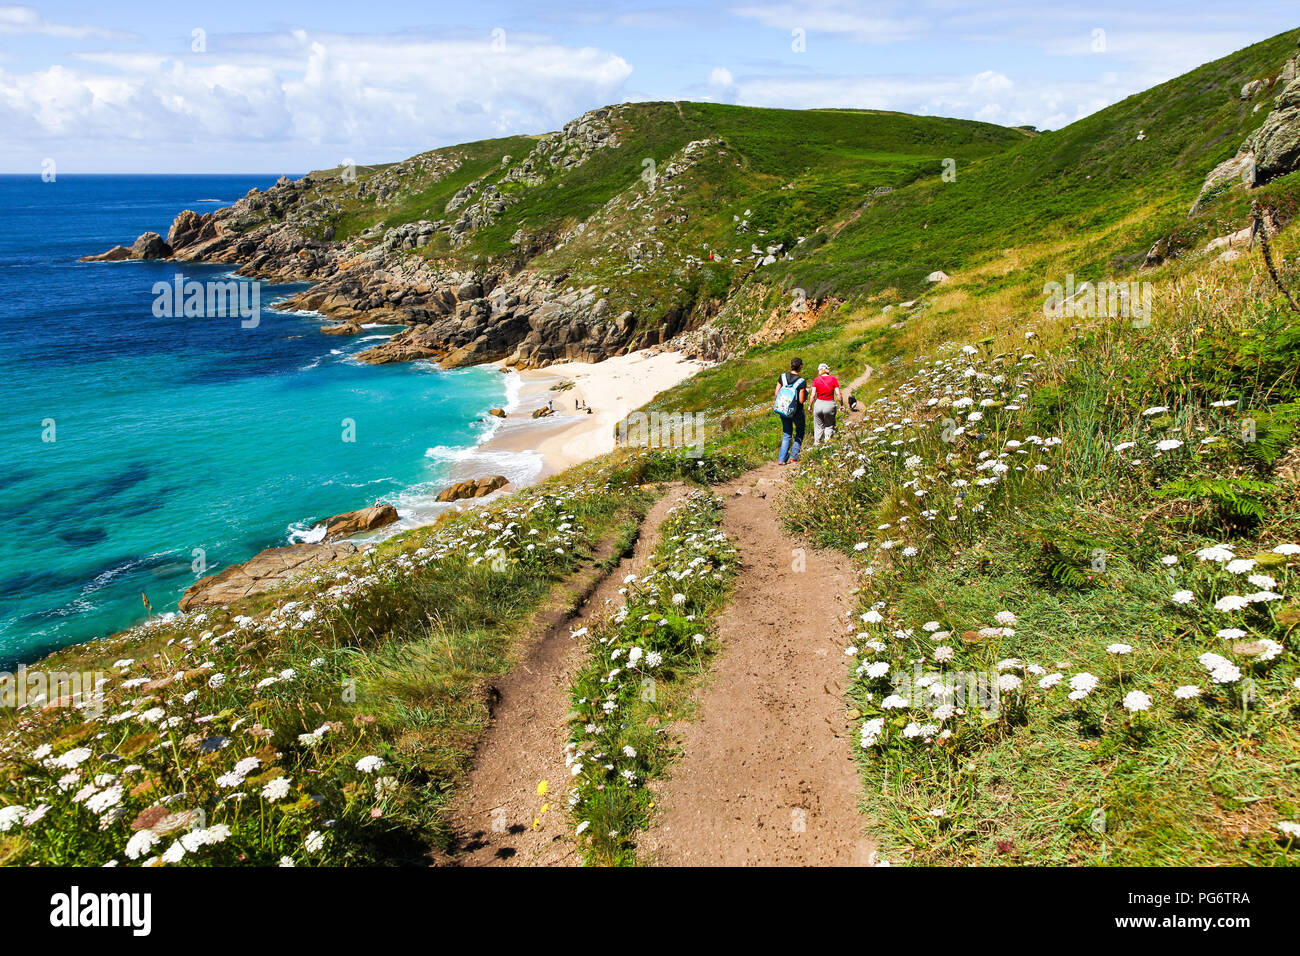 People walking on the footpath above Porthchapel or Porth Chapel beach, Cornwall, South West England, UK Stock Photo